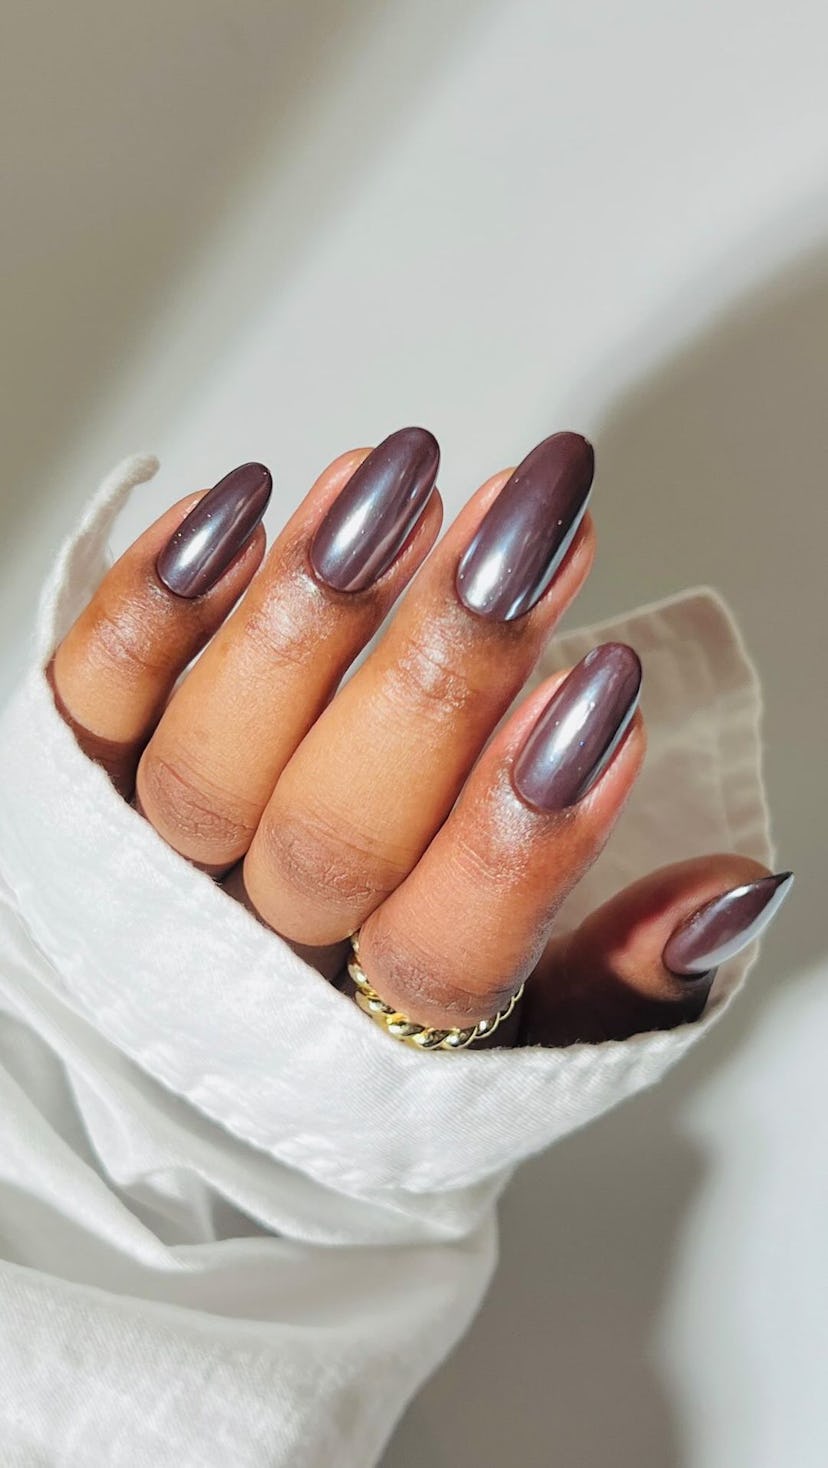 Chrome nails have been one of the most popular beauty trends of 2023.